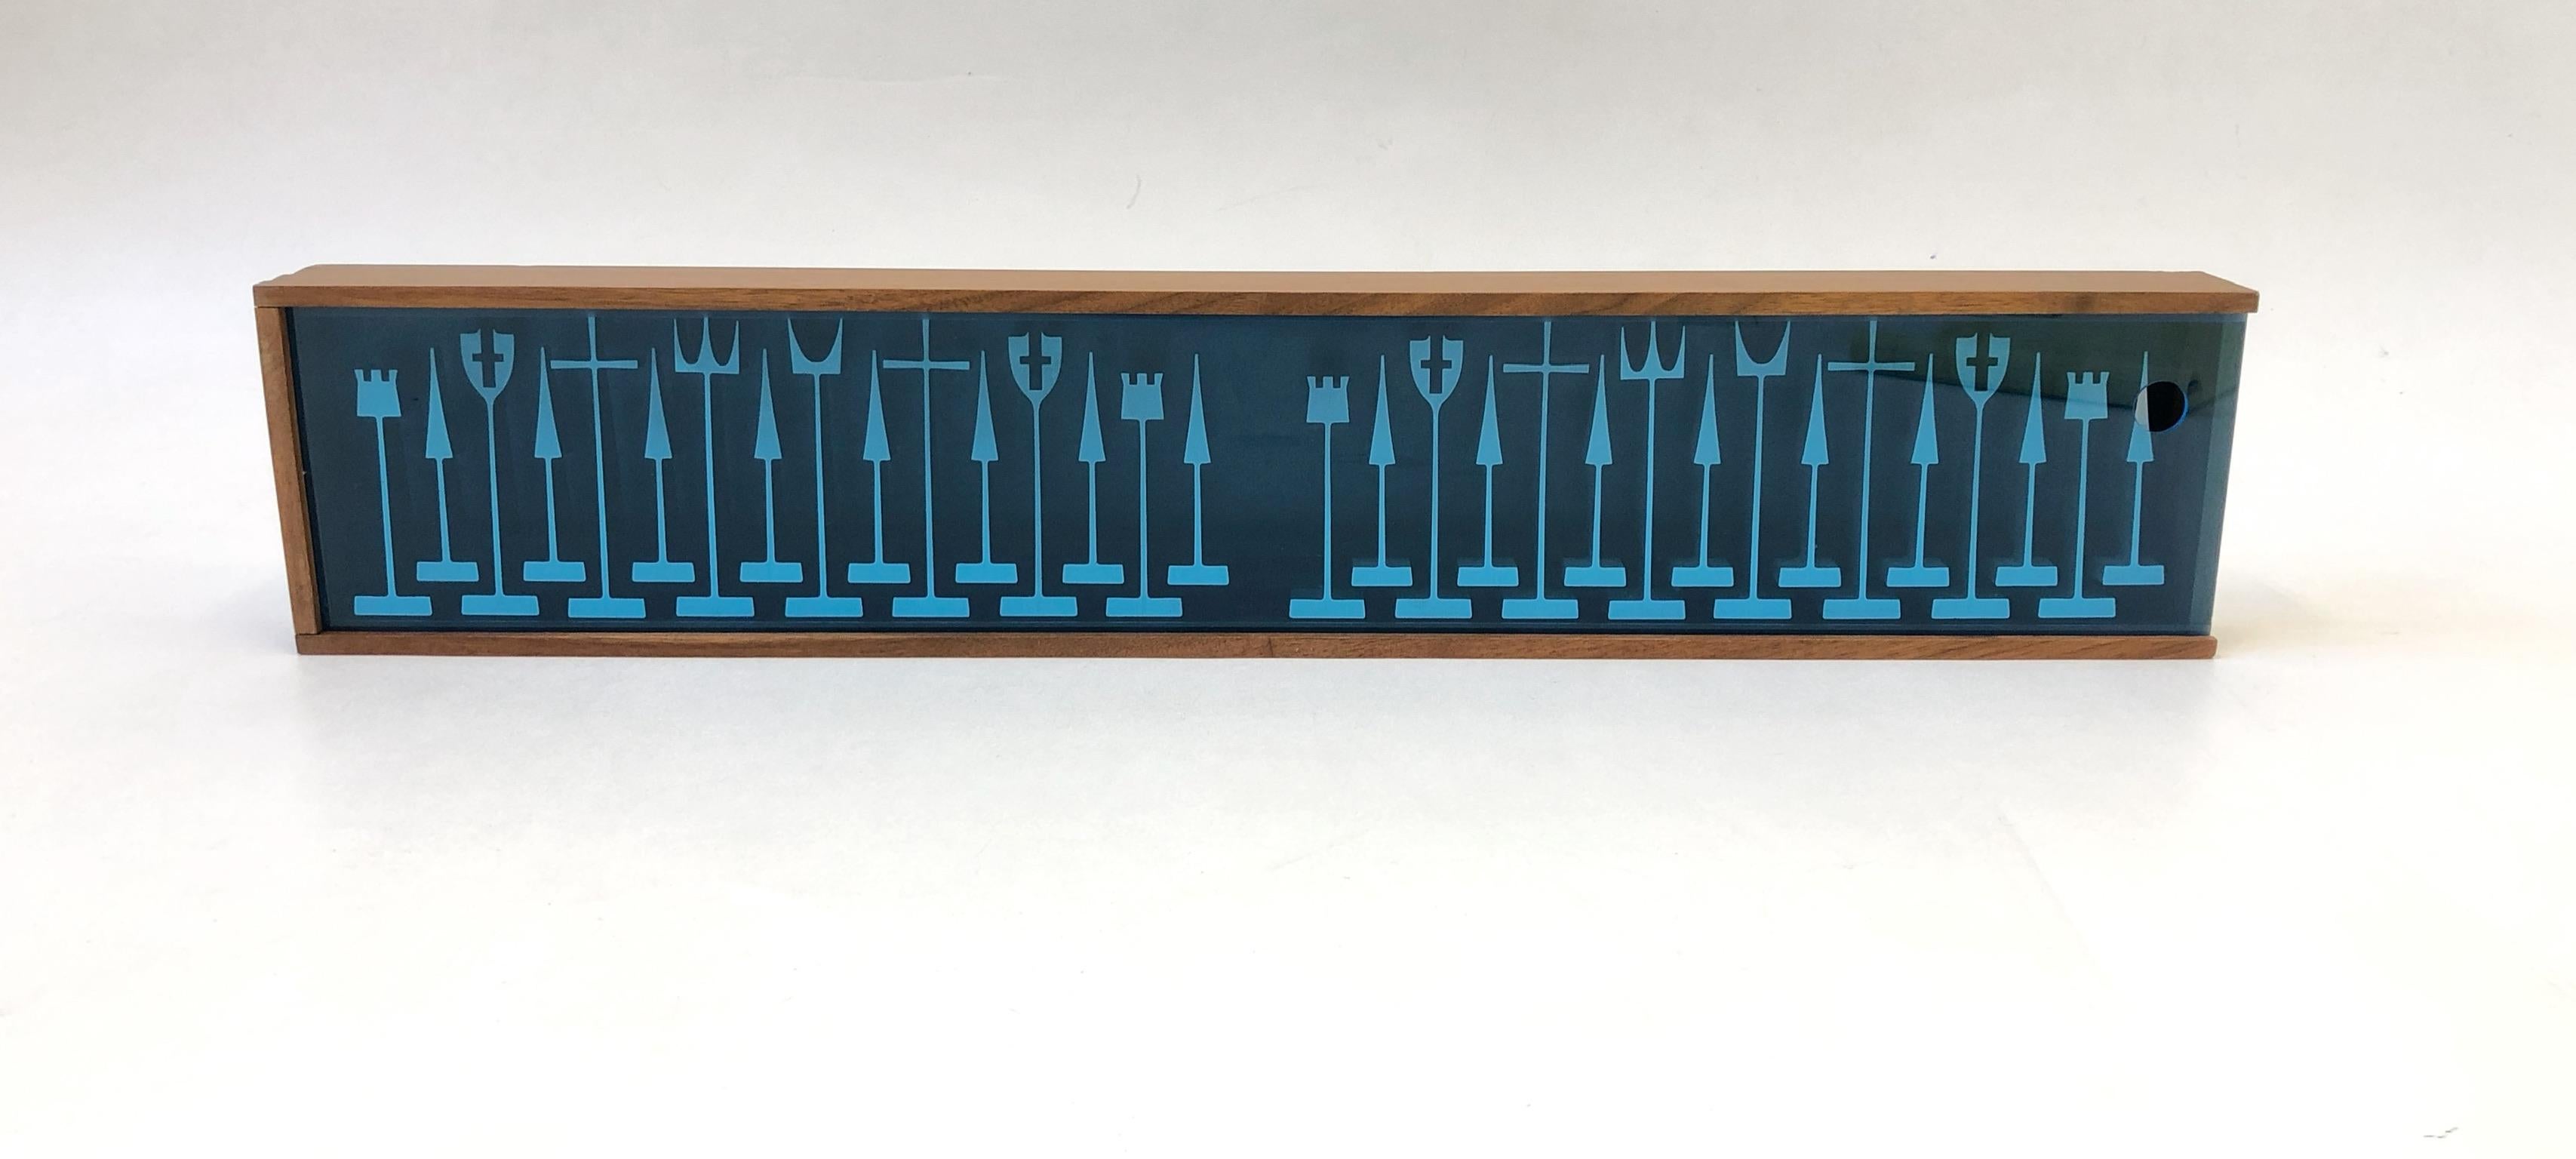 A spectacular aluminum chess set designed by Austin Cox for Austin Enterprises in 1962. The set is stored and displayed in a wall mountable walnut case with a blue acrylic cover. All of the pieces are marked (1962 Austin Enterprises).

Dim: 
The